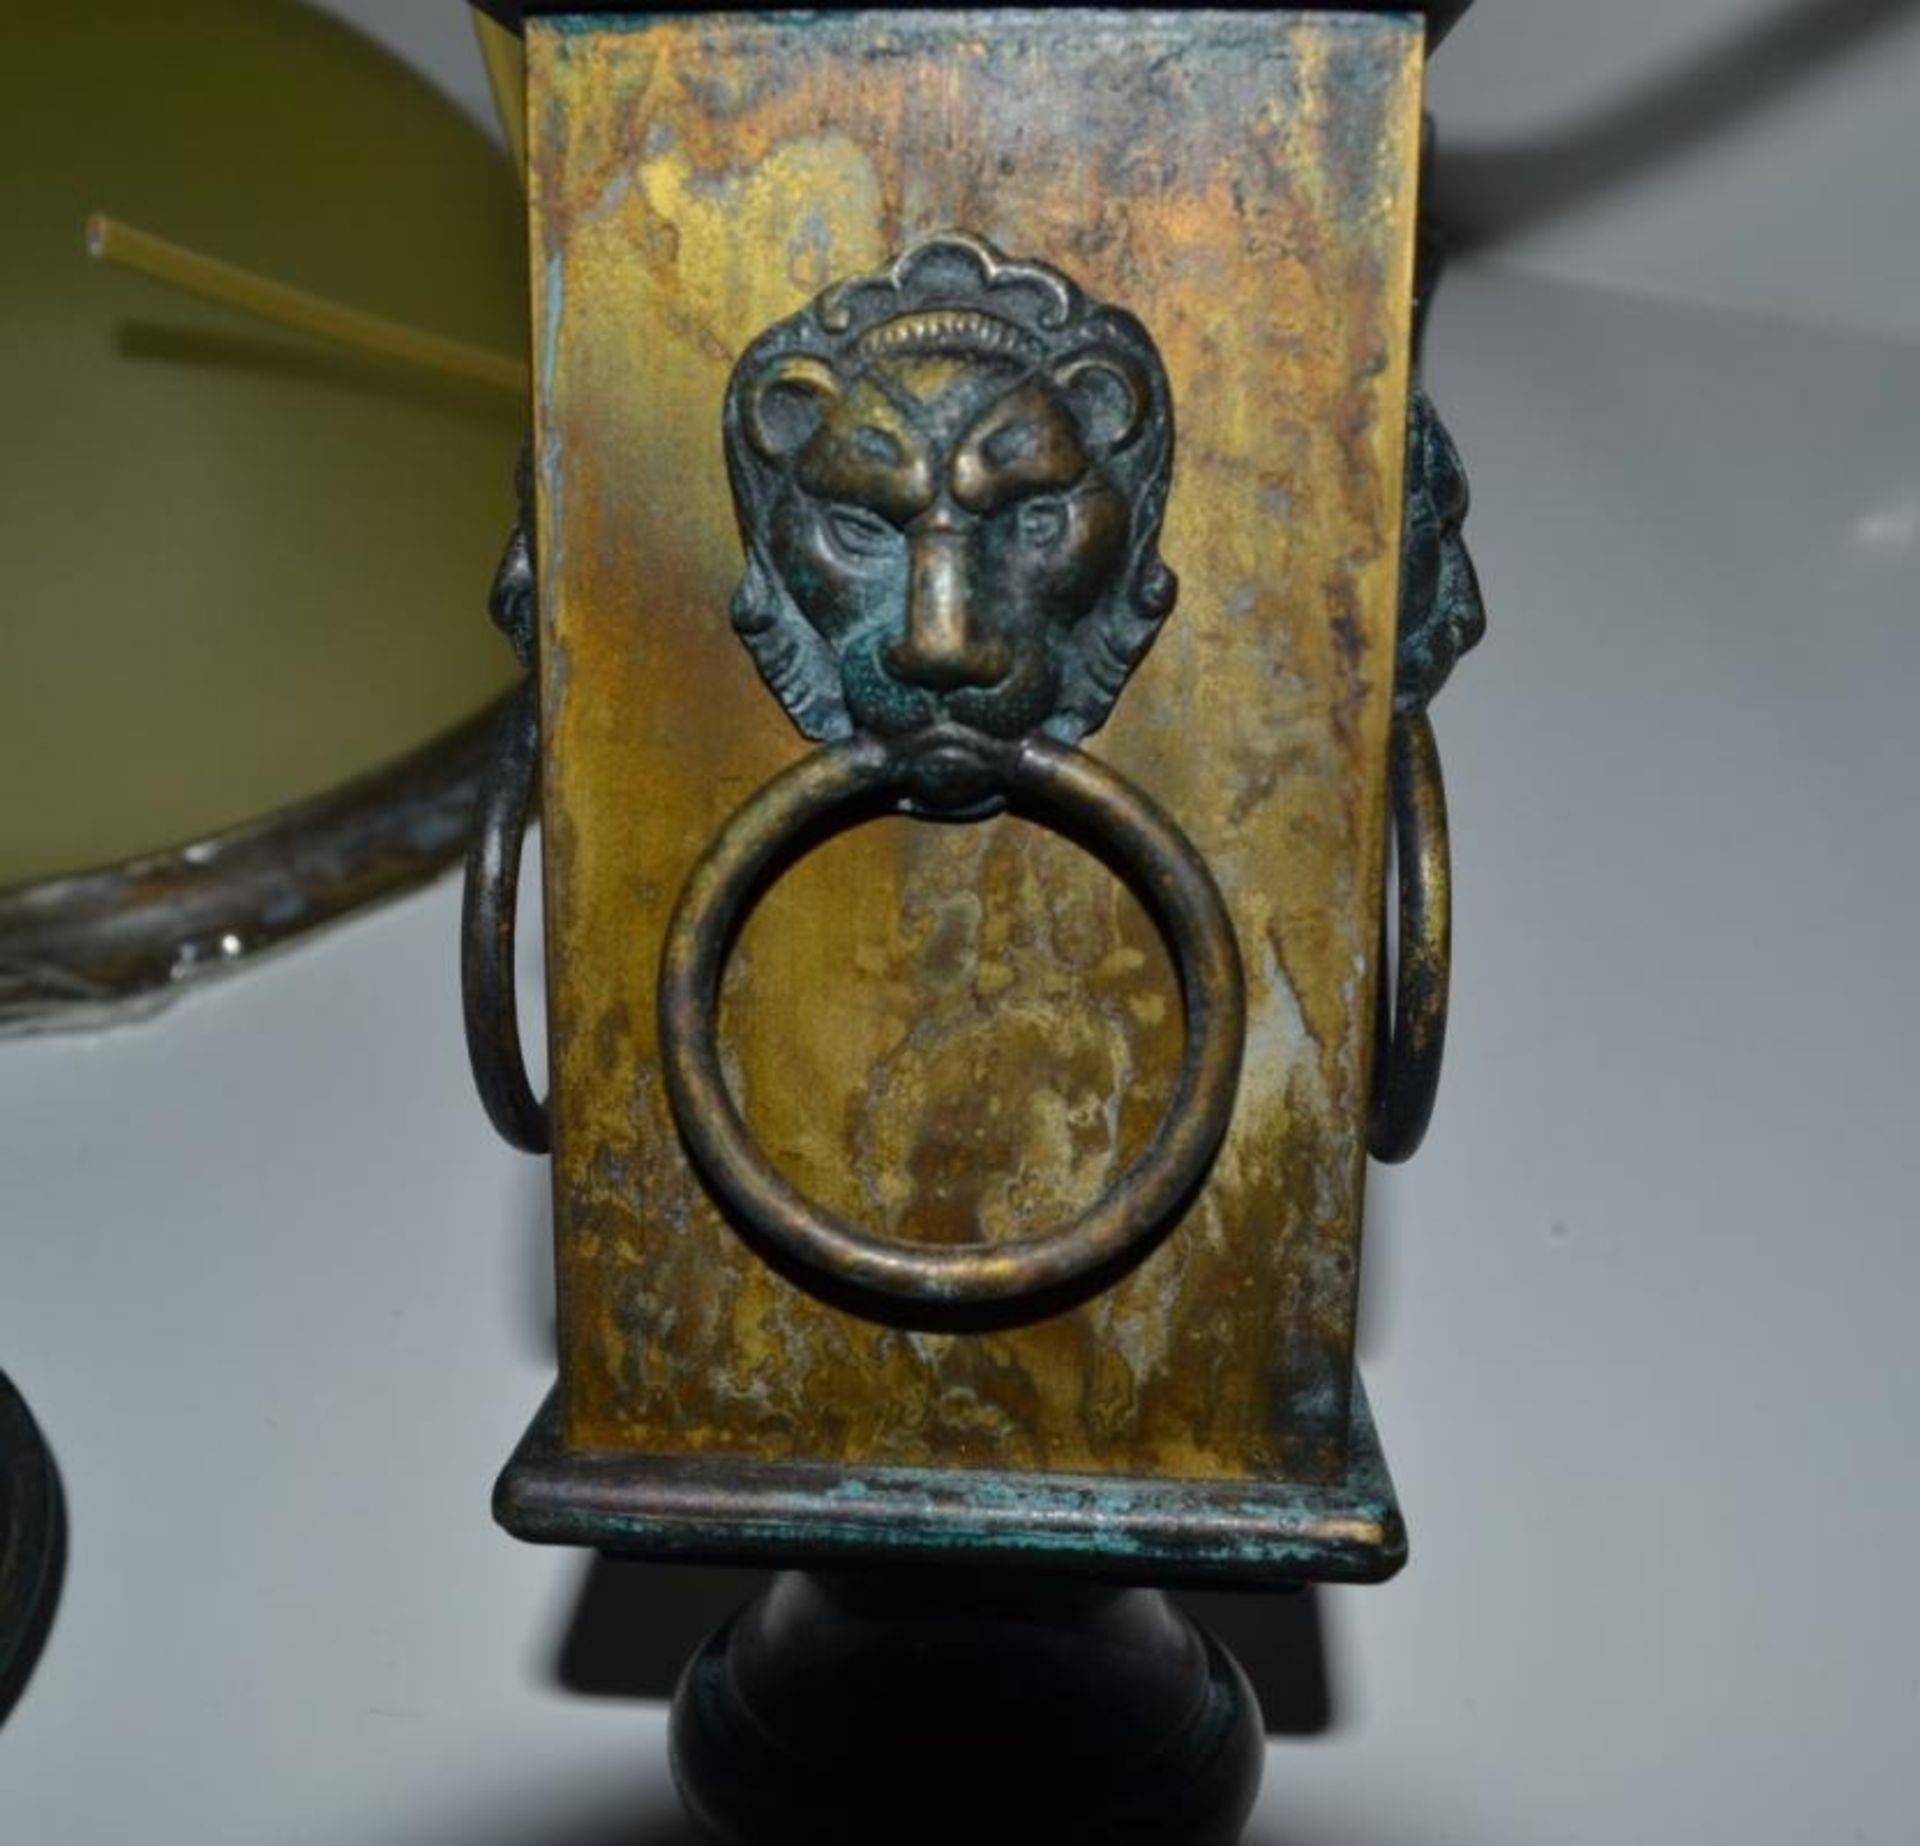 1 x Etruscan Antique Look Wall Sconce by Chelsom With Glass Lamp - New/Unused boxed stock - CL001 - - Image 3 of 5